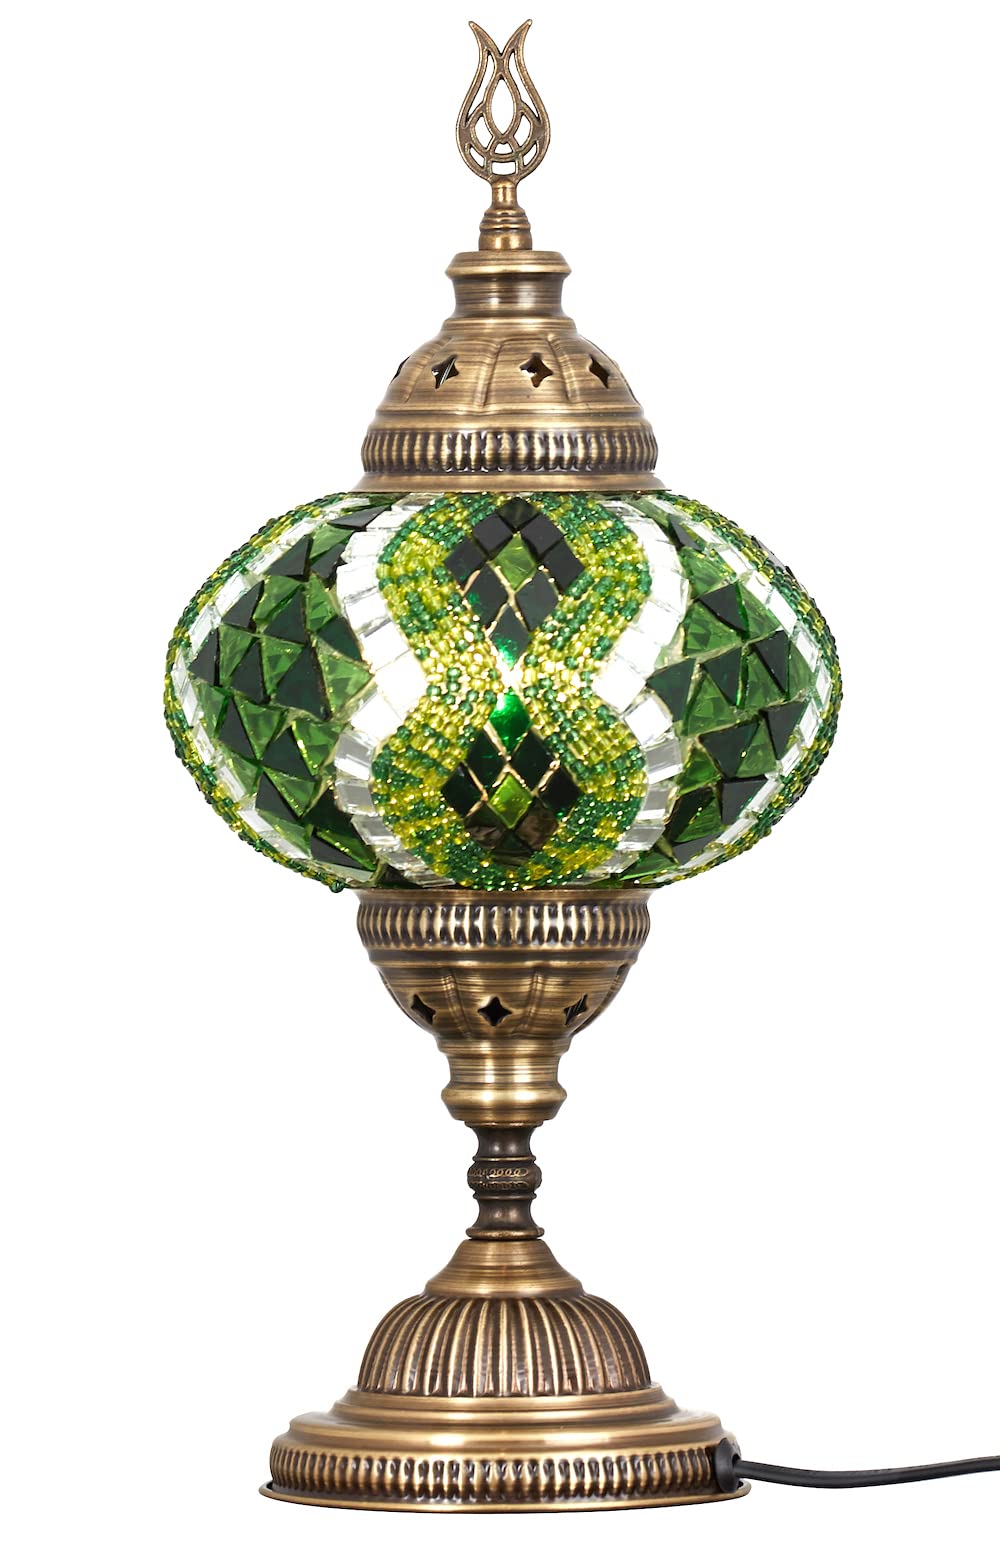 DEMMEX Turkish Moroccan Mosaic Table Bedside Night Lamp, Tiffany Style Colorful Handmade Glass Mosaics Unique Oriental Exotic Table Lamp, 6.5